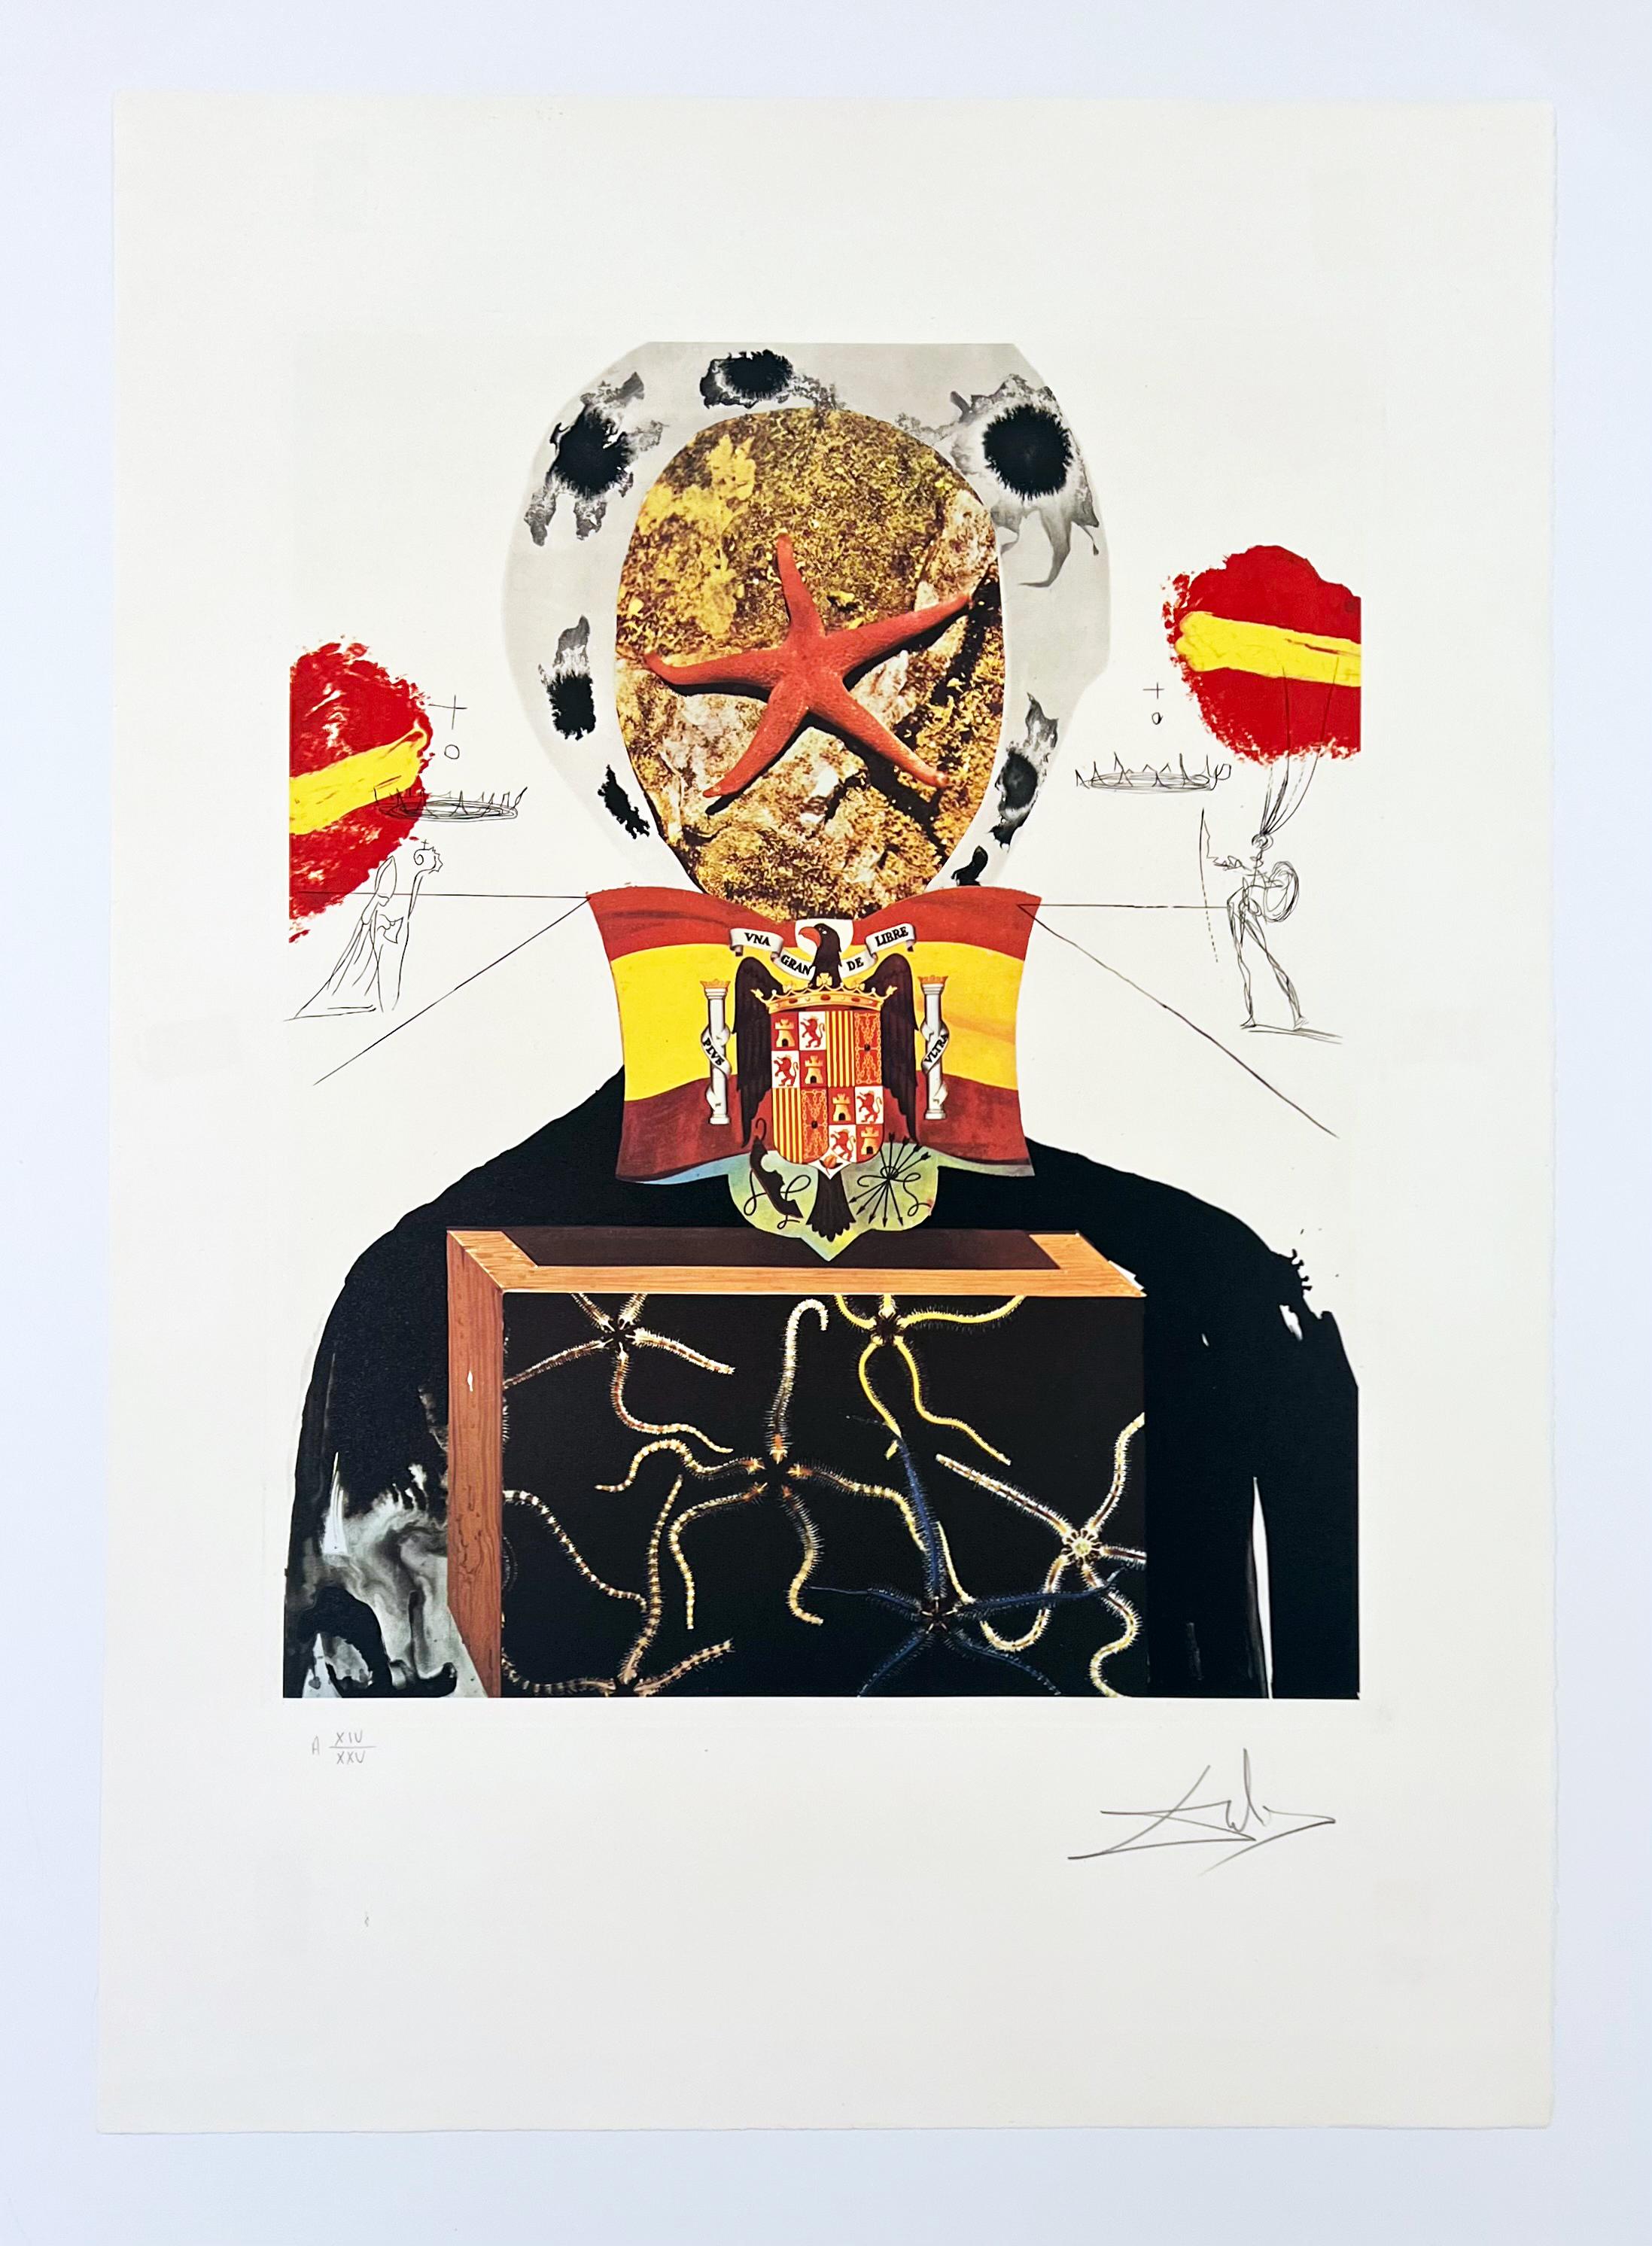 Surrealist King, from 1971 Memories of Surrealism - Print by Salvador Dalí